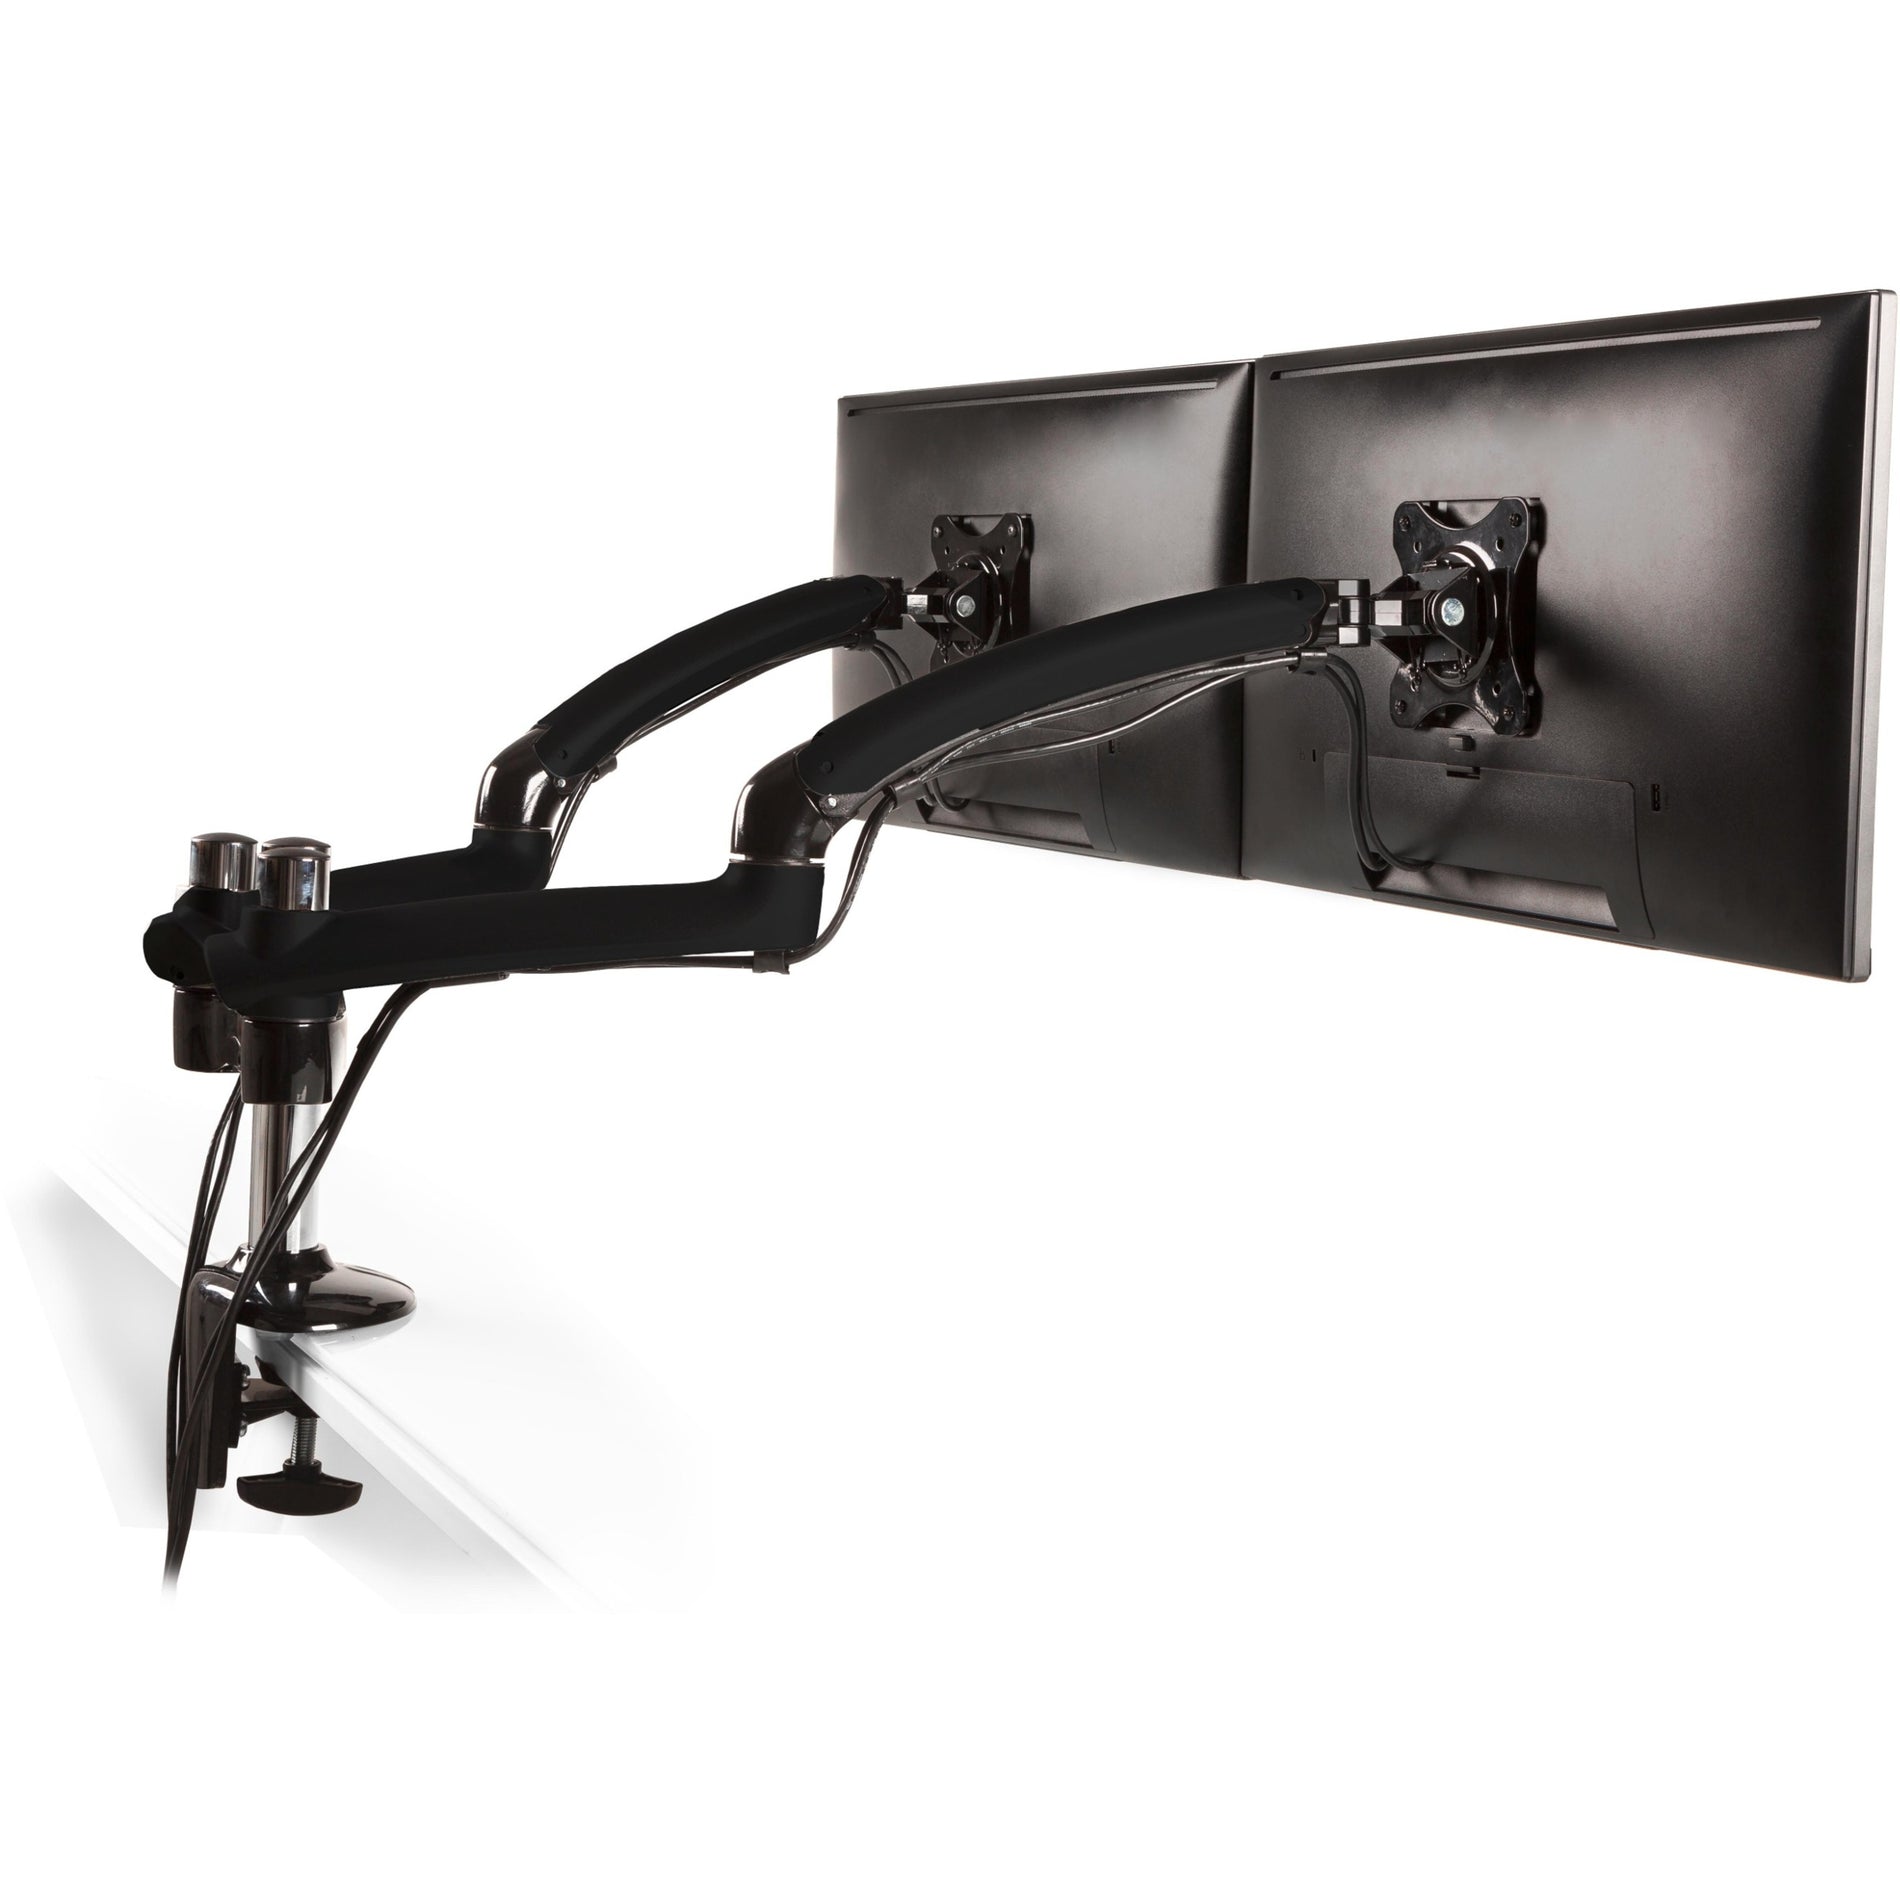 Ergotech FDM-PC-G02 Freedom Arm Dual Stylish & Functional Articulating Monitor Arm, Mounting Arm for 2 Monitors, Metal Gray, 35.60 lb Maximum Load Capacity, 27" Maximum Screen Size Supported